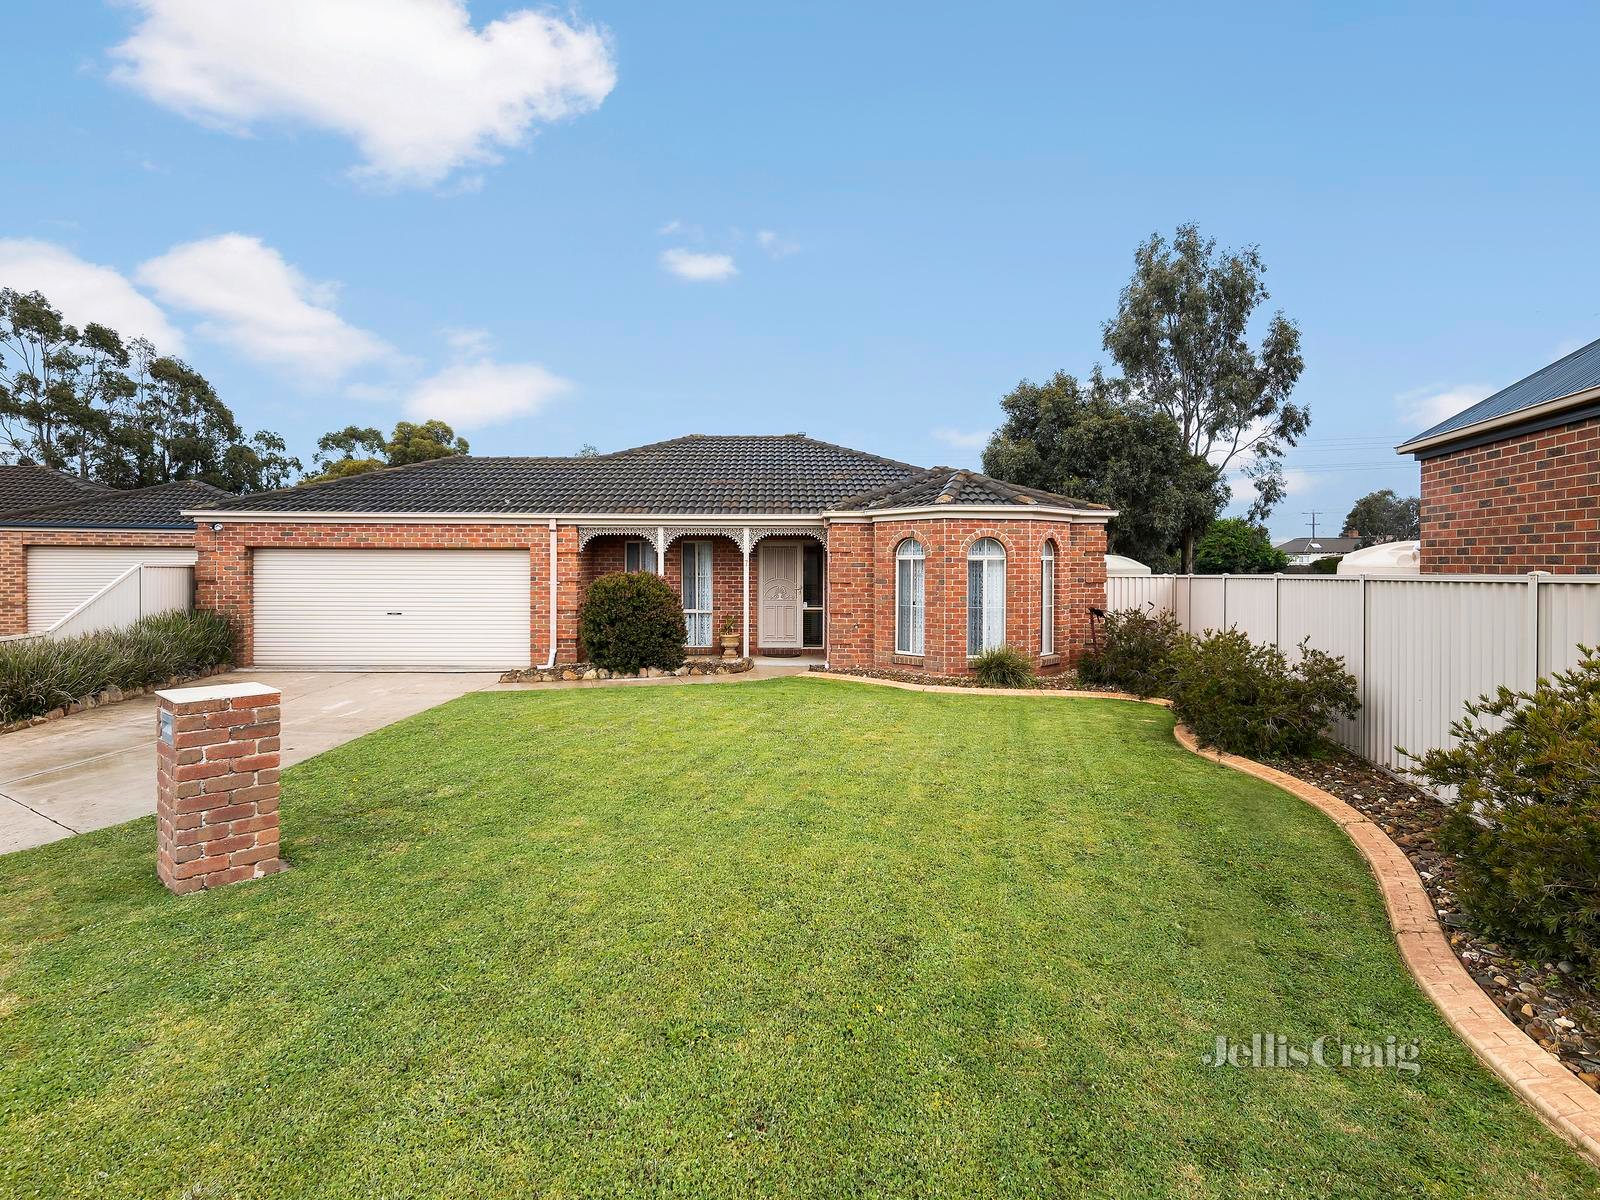 7 Yootha Court, Miners Rest - Image 1